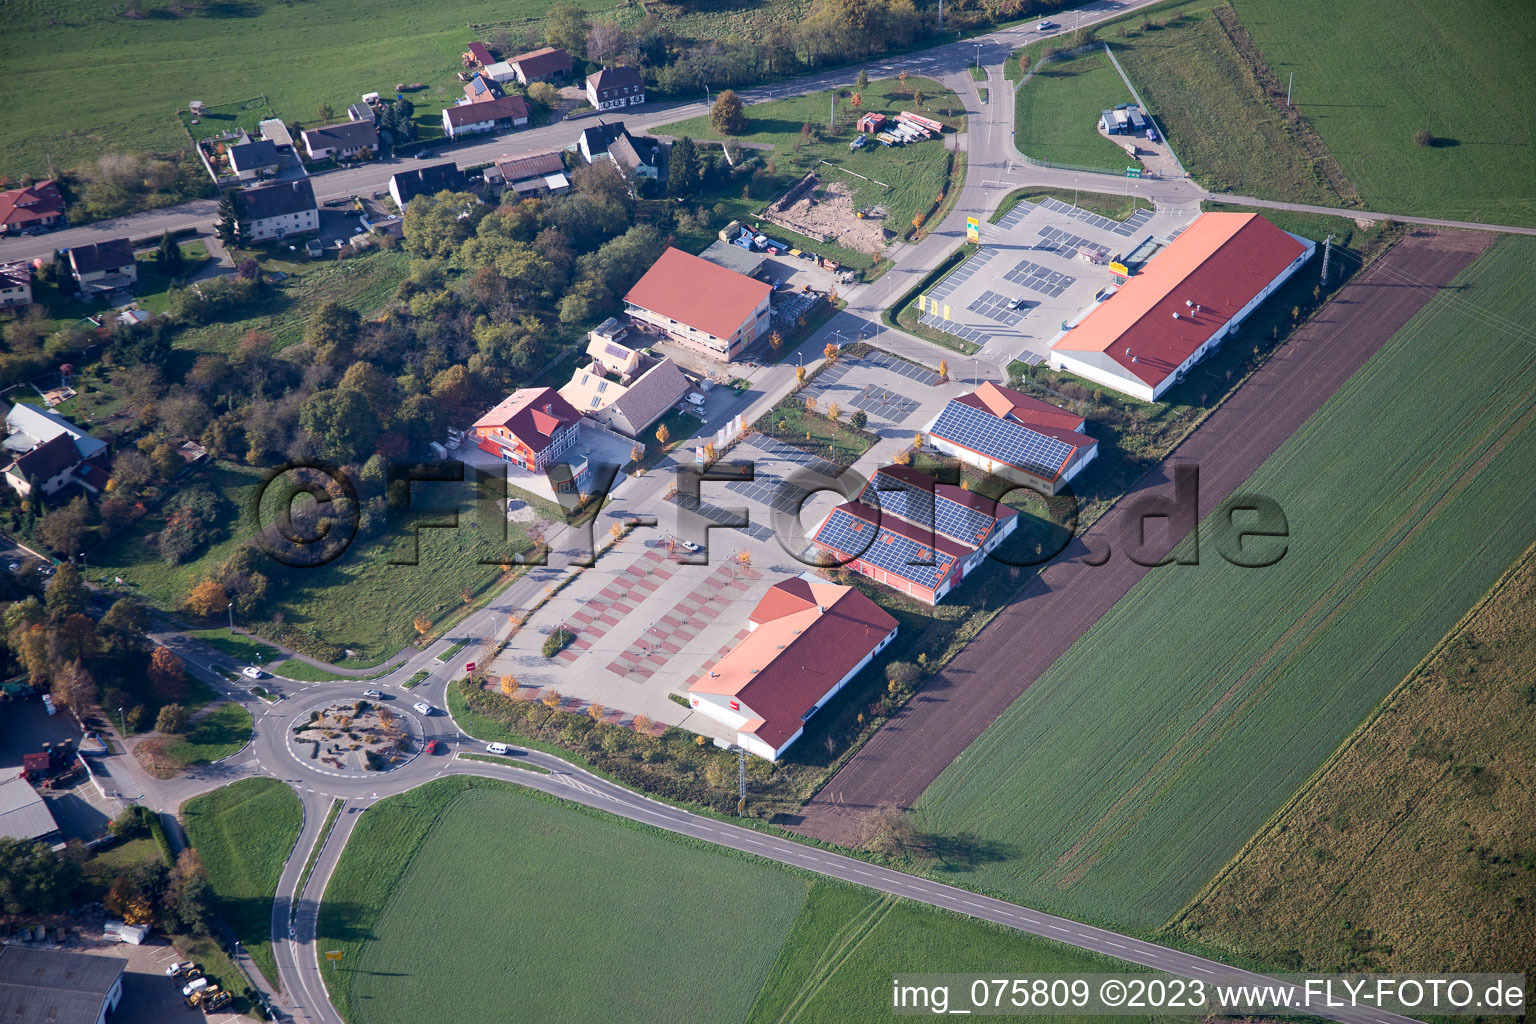 Aerial view of Shopping mall in Neulauterburg in the state Rhineland-Palatinate, Germany